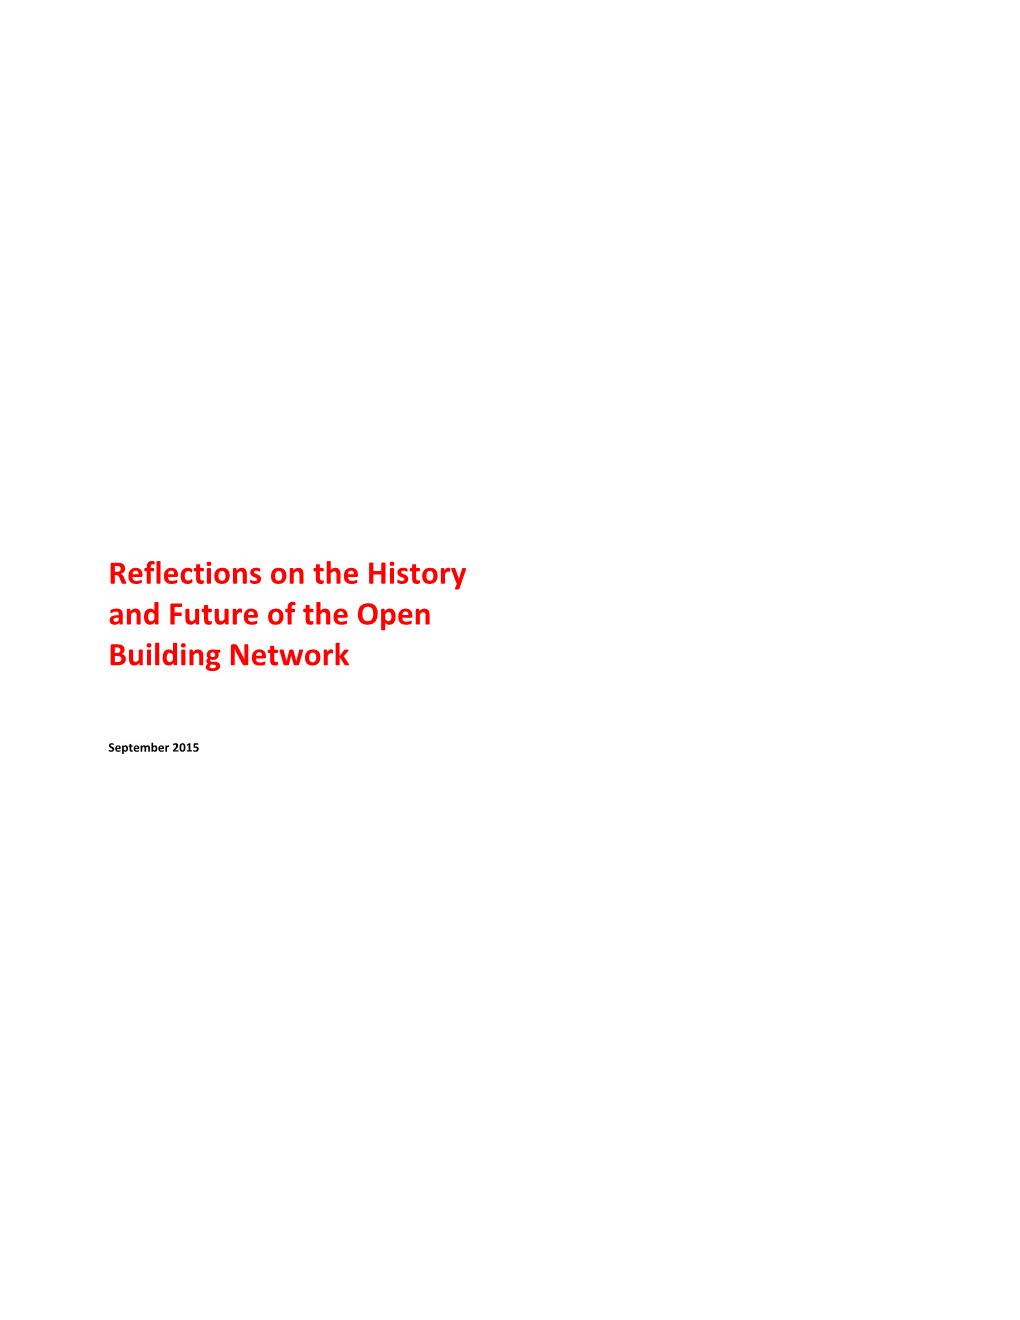 Reflections on the History and Future of the Open Building Network